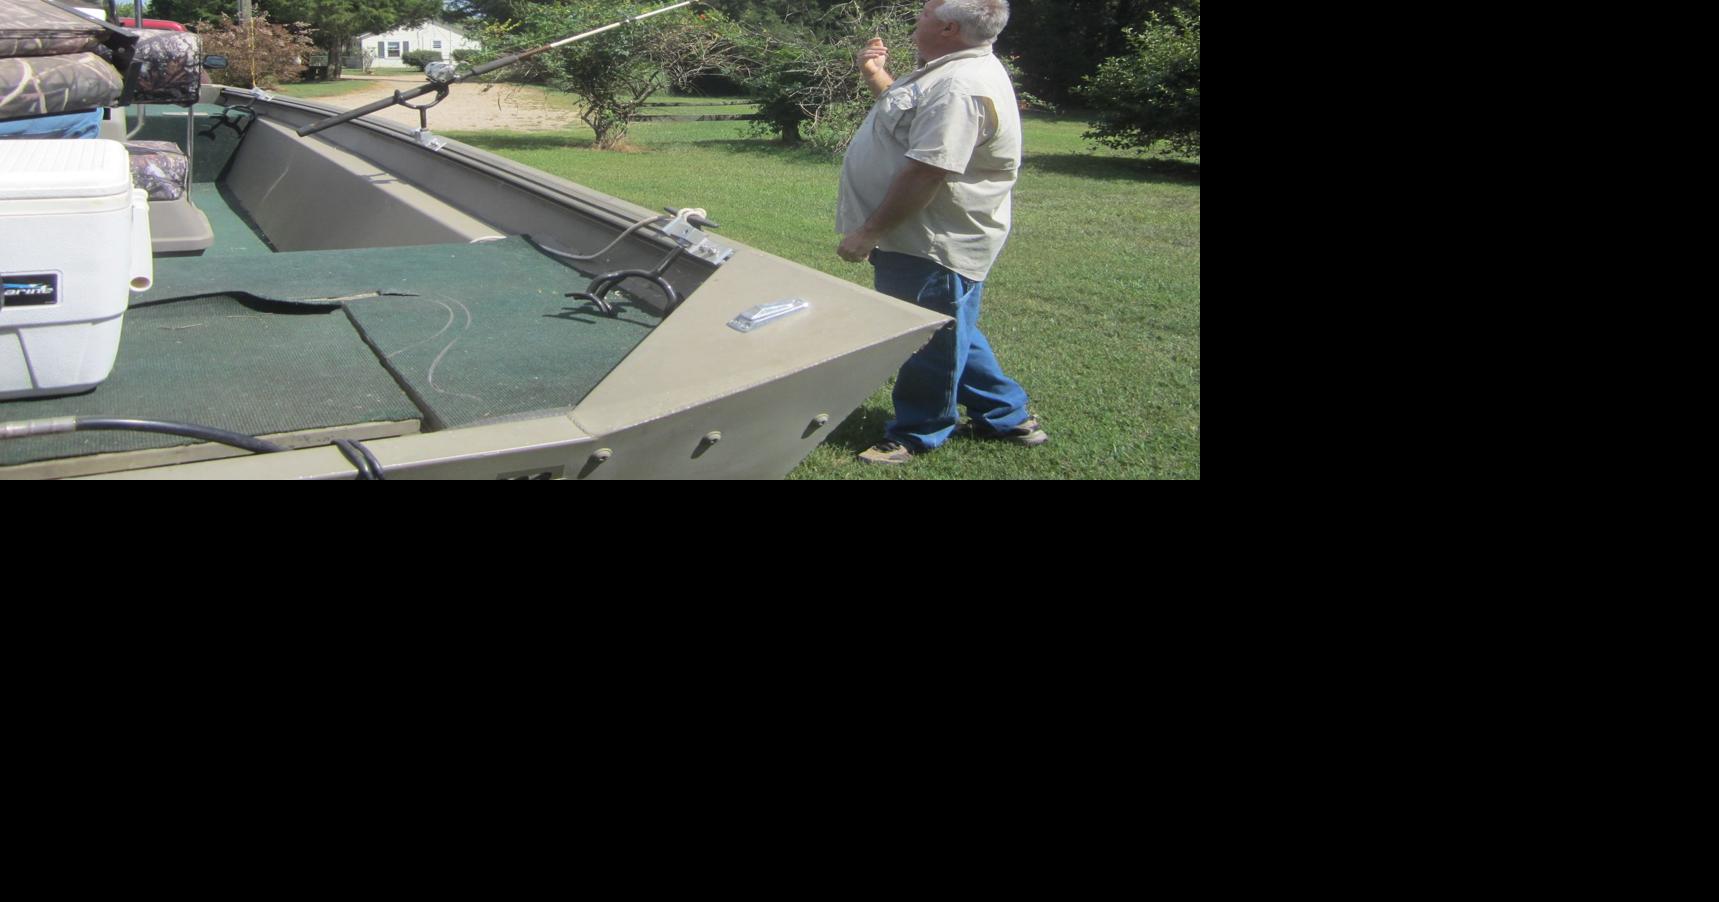 Ringgold man creates new, simpler base to hold fishing rods